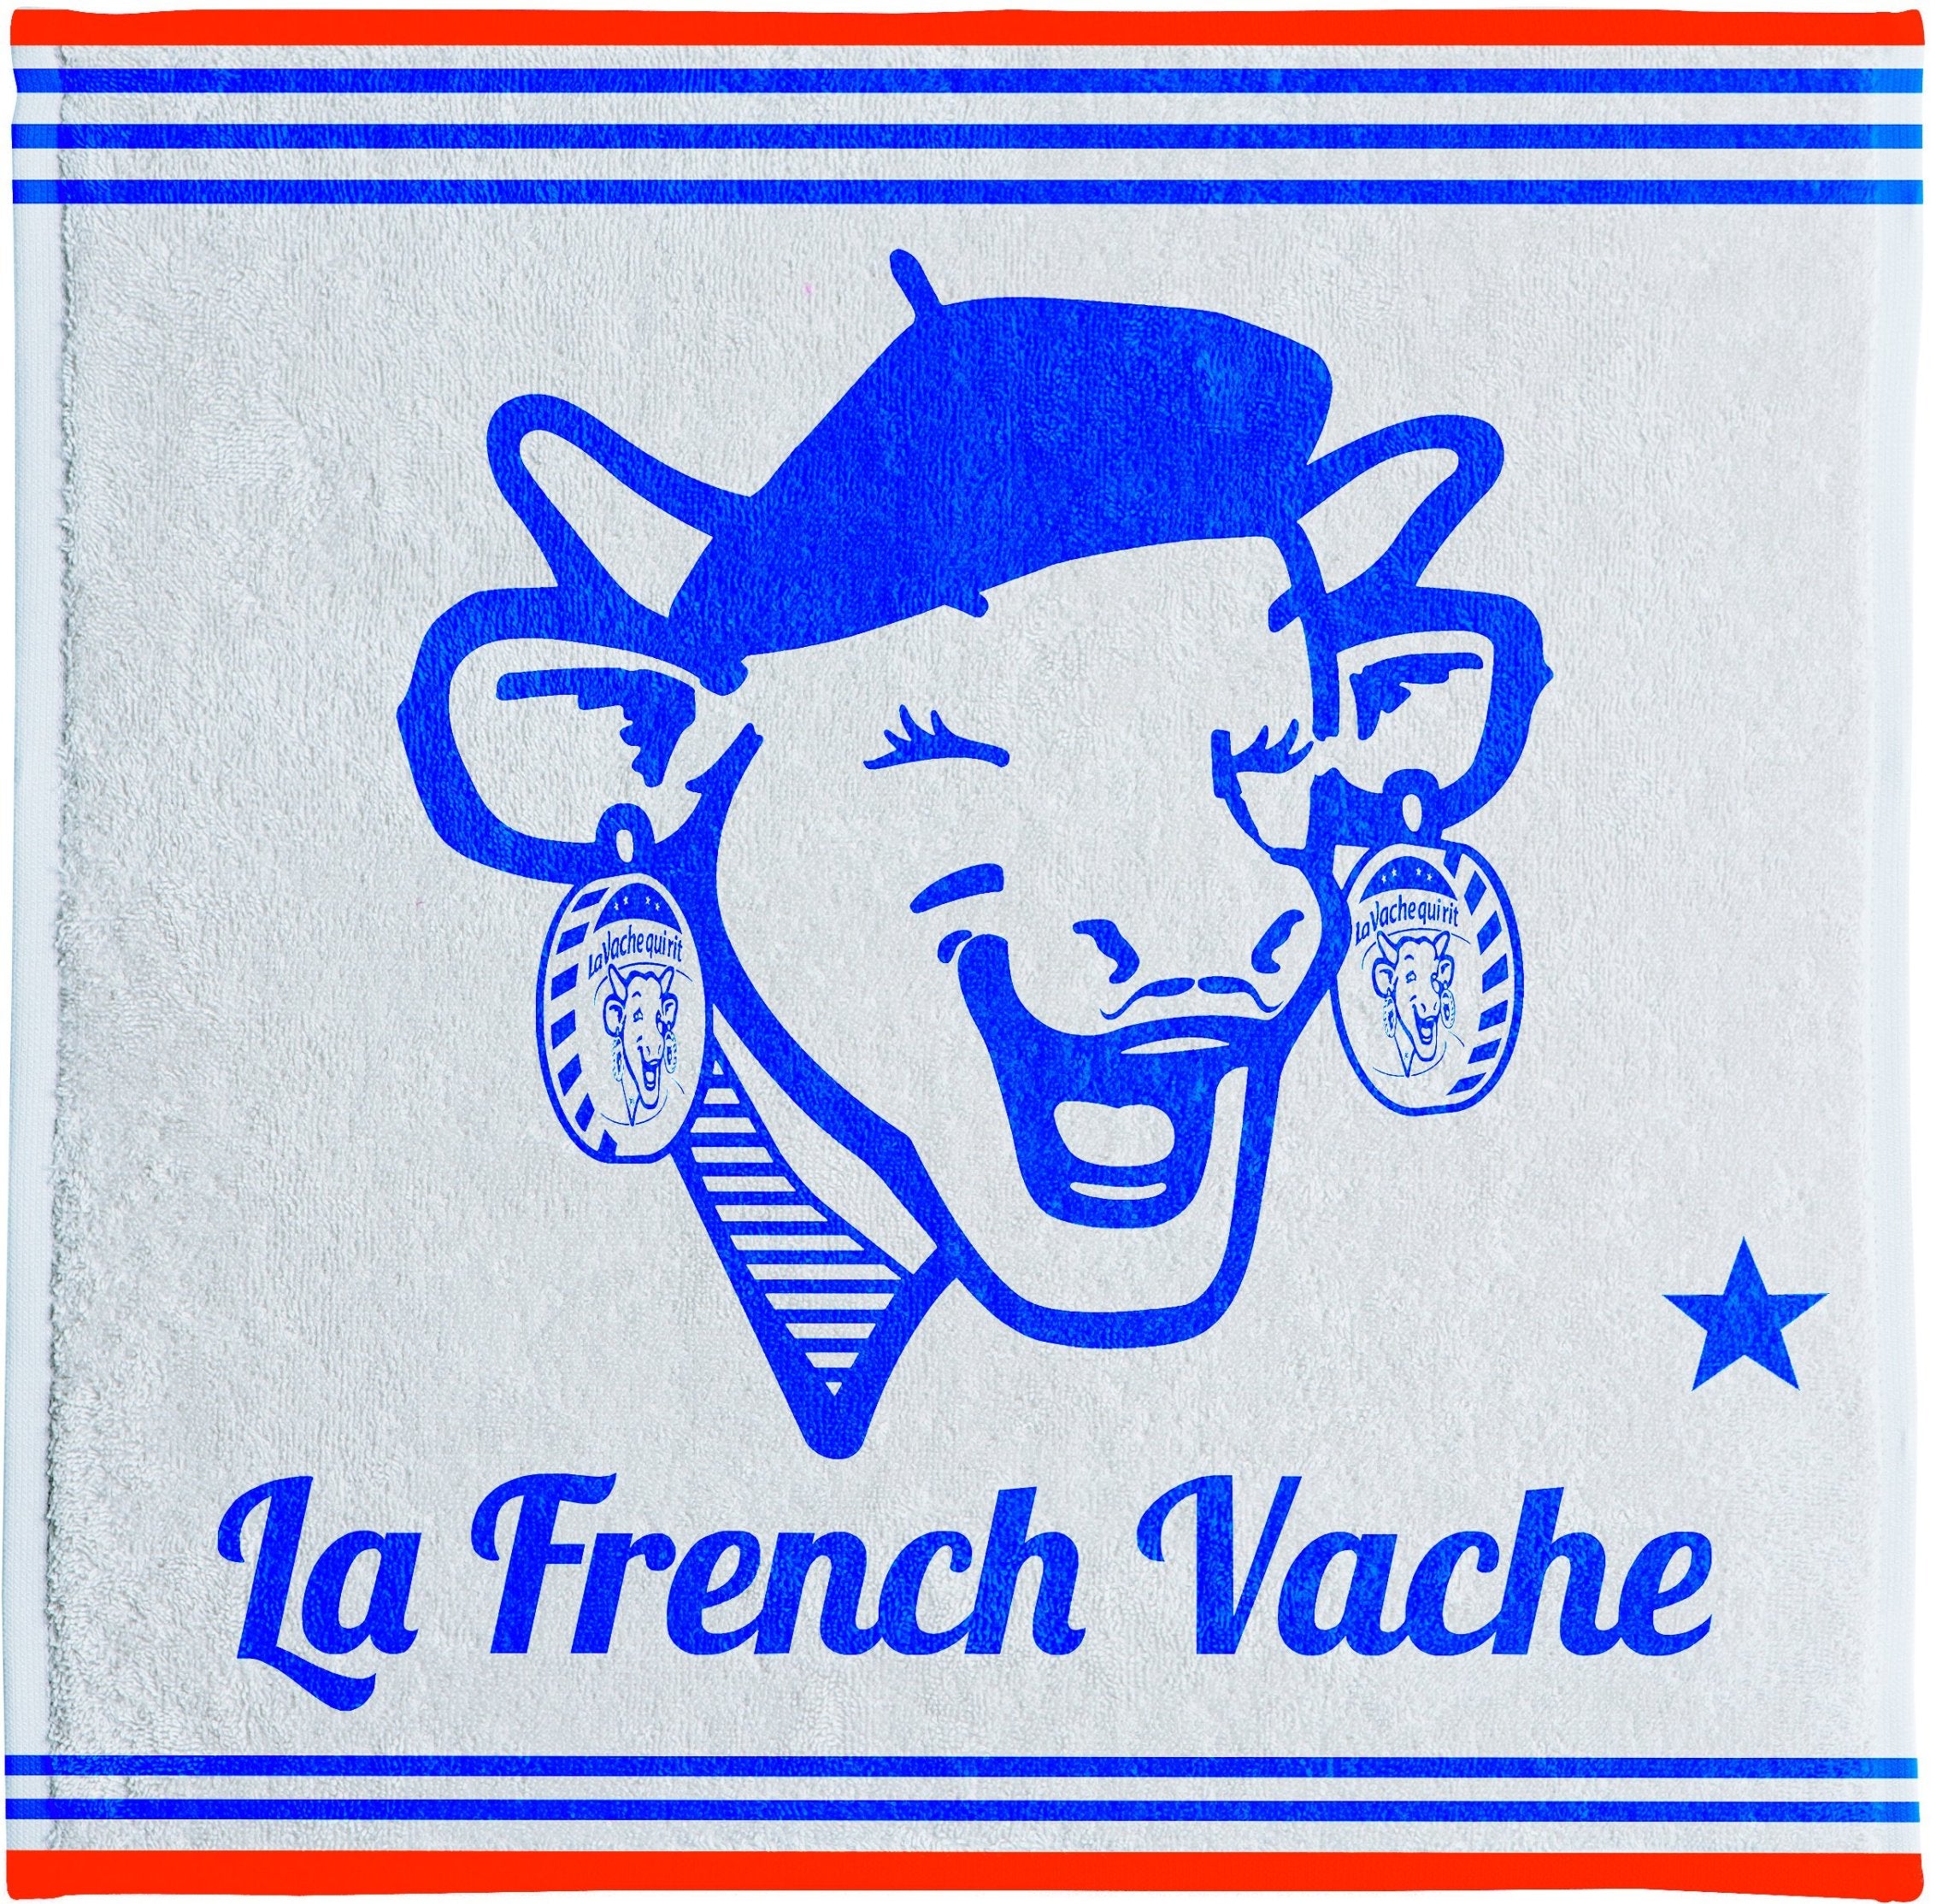 Coucke "French Vache", Cotton terry hand towel. Designed in France.